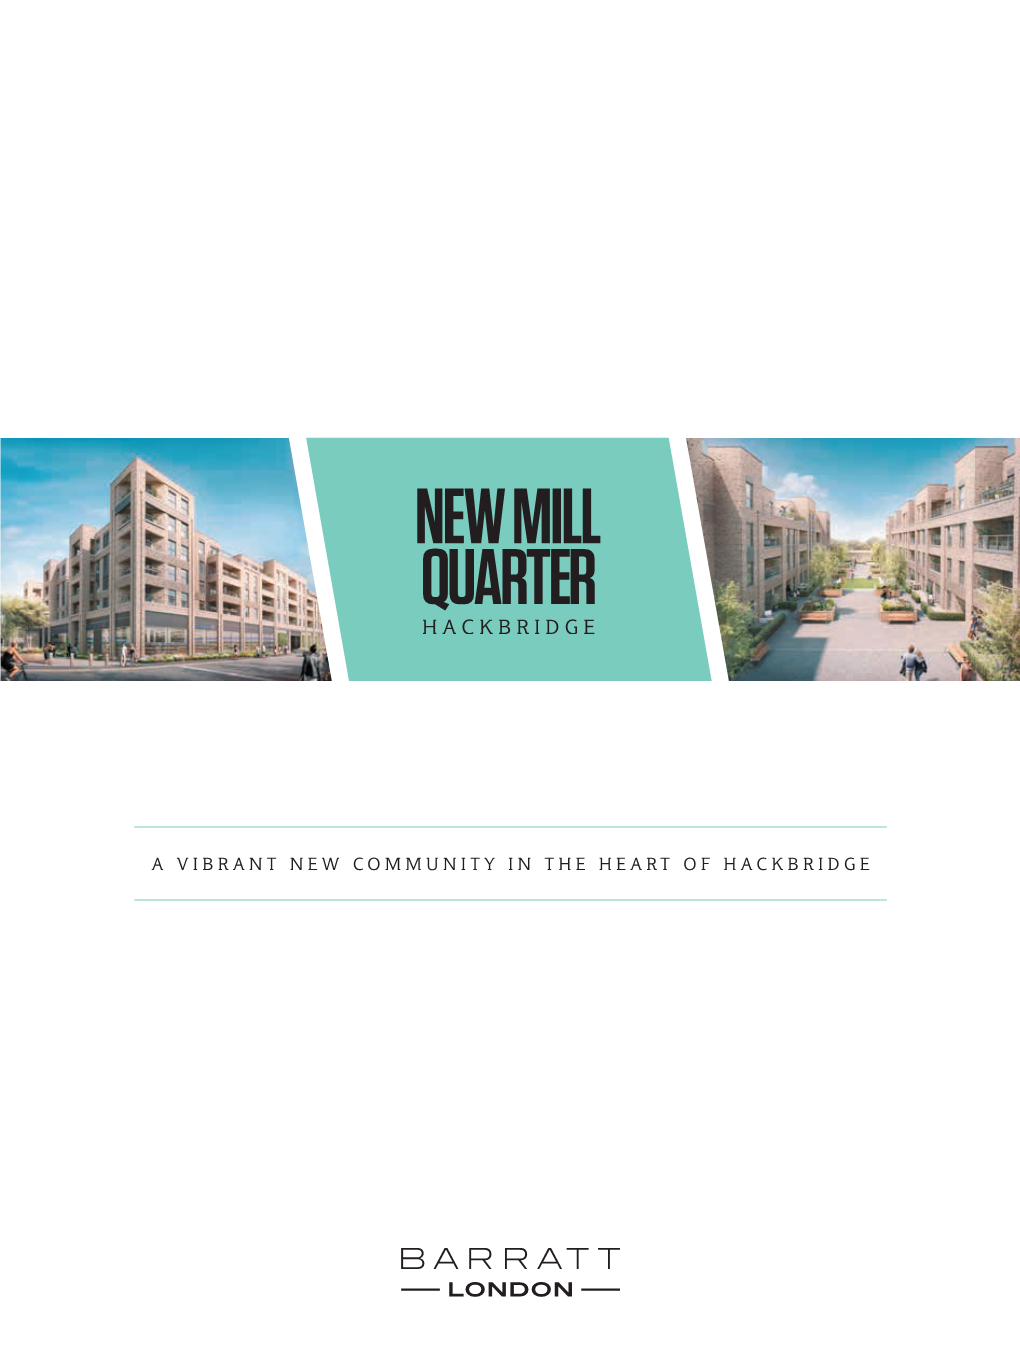 A Vibrant New Community in the Heart of Hackbridge Welcome to New Mill Quarter